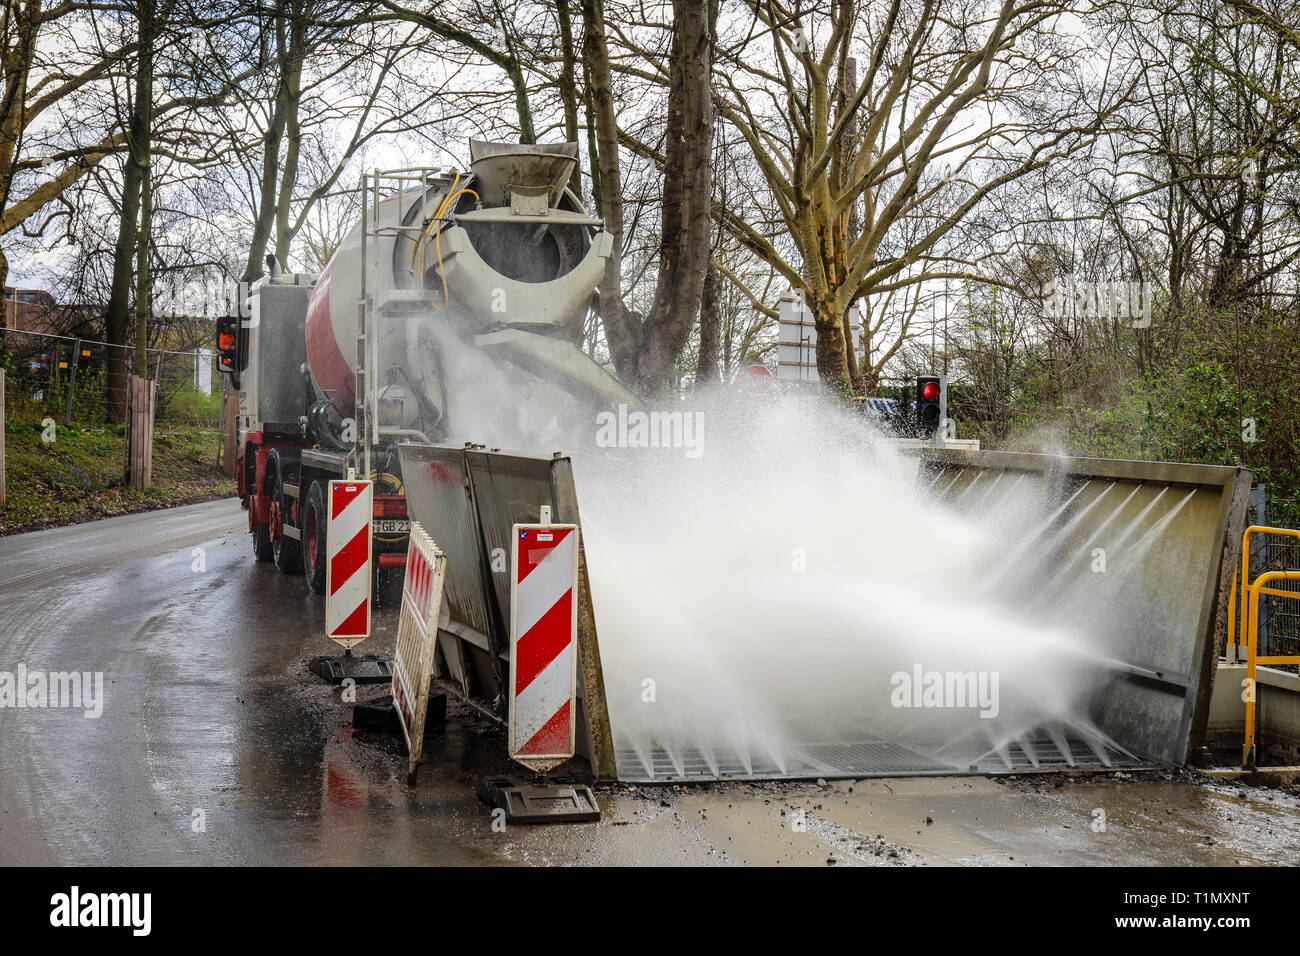 Essen, North Rhine-Westphalia, Germany - A construction site vehicle, here a concrete mixer, drives through a truck wash at a construction site exit.  Stock Photo